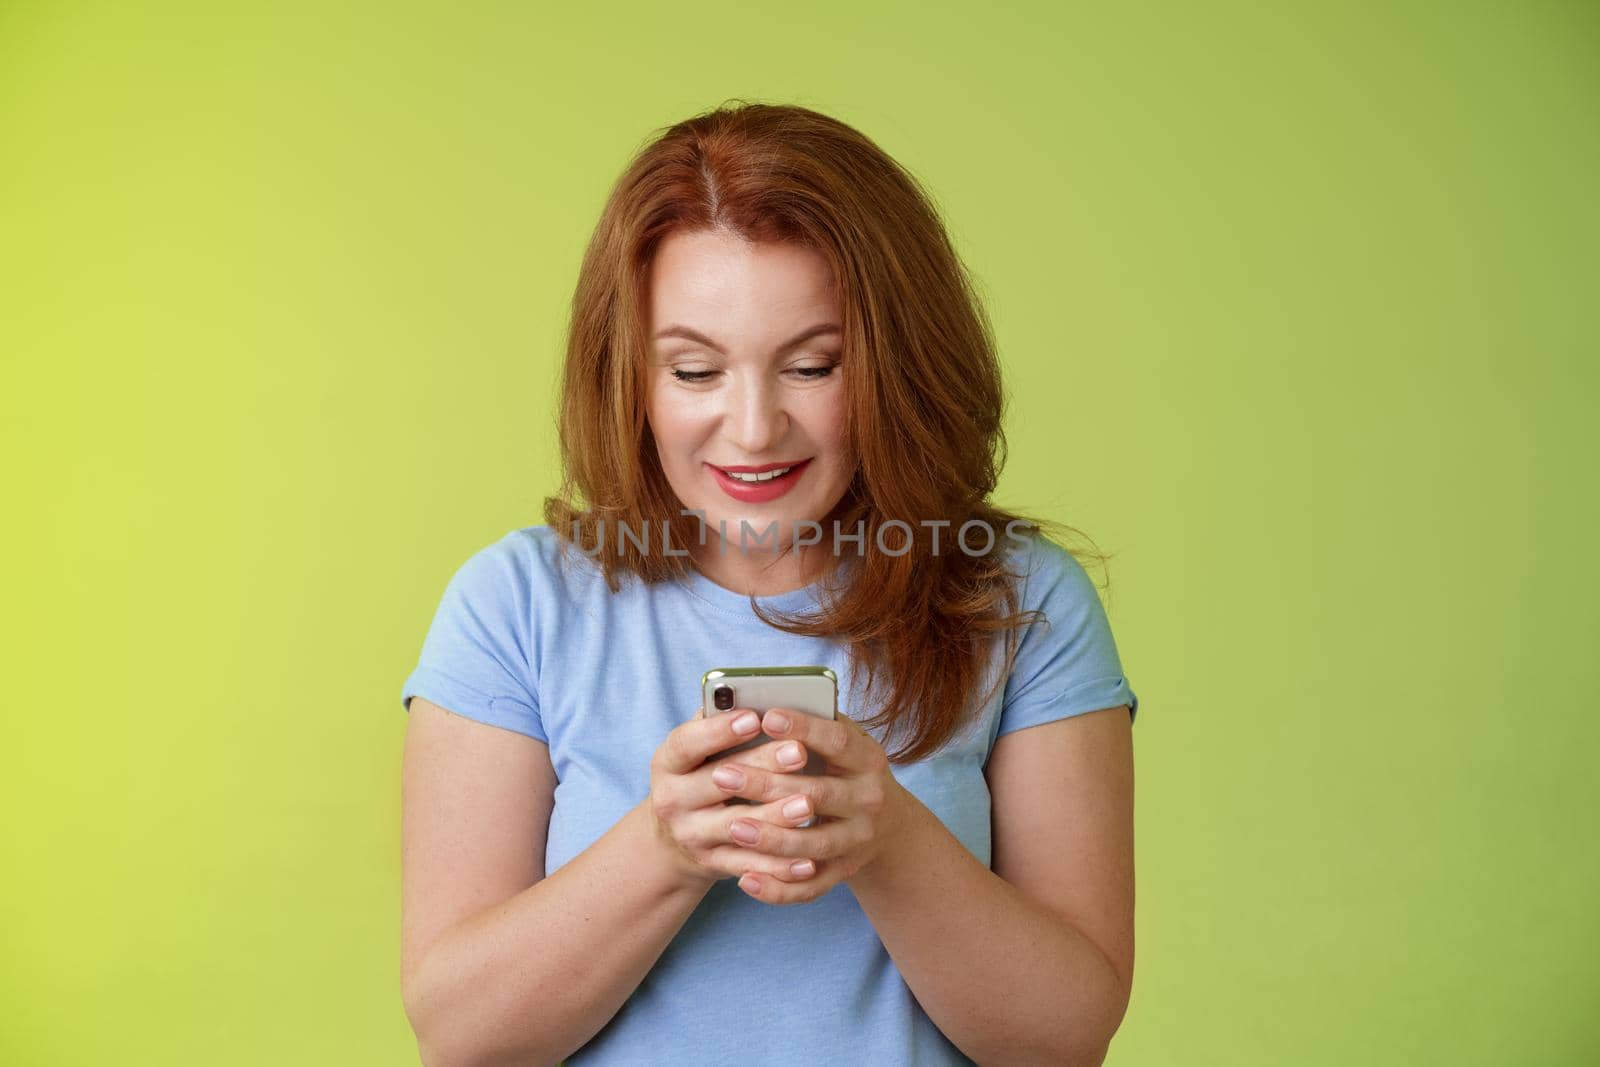 Intrigued excited tempting redhead middle-aged woman shopping online smartphone hold mobile phone look pleased entertained gadget screen smiling delighted playing game found perfect app.